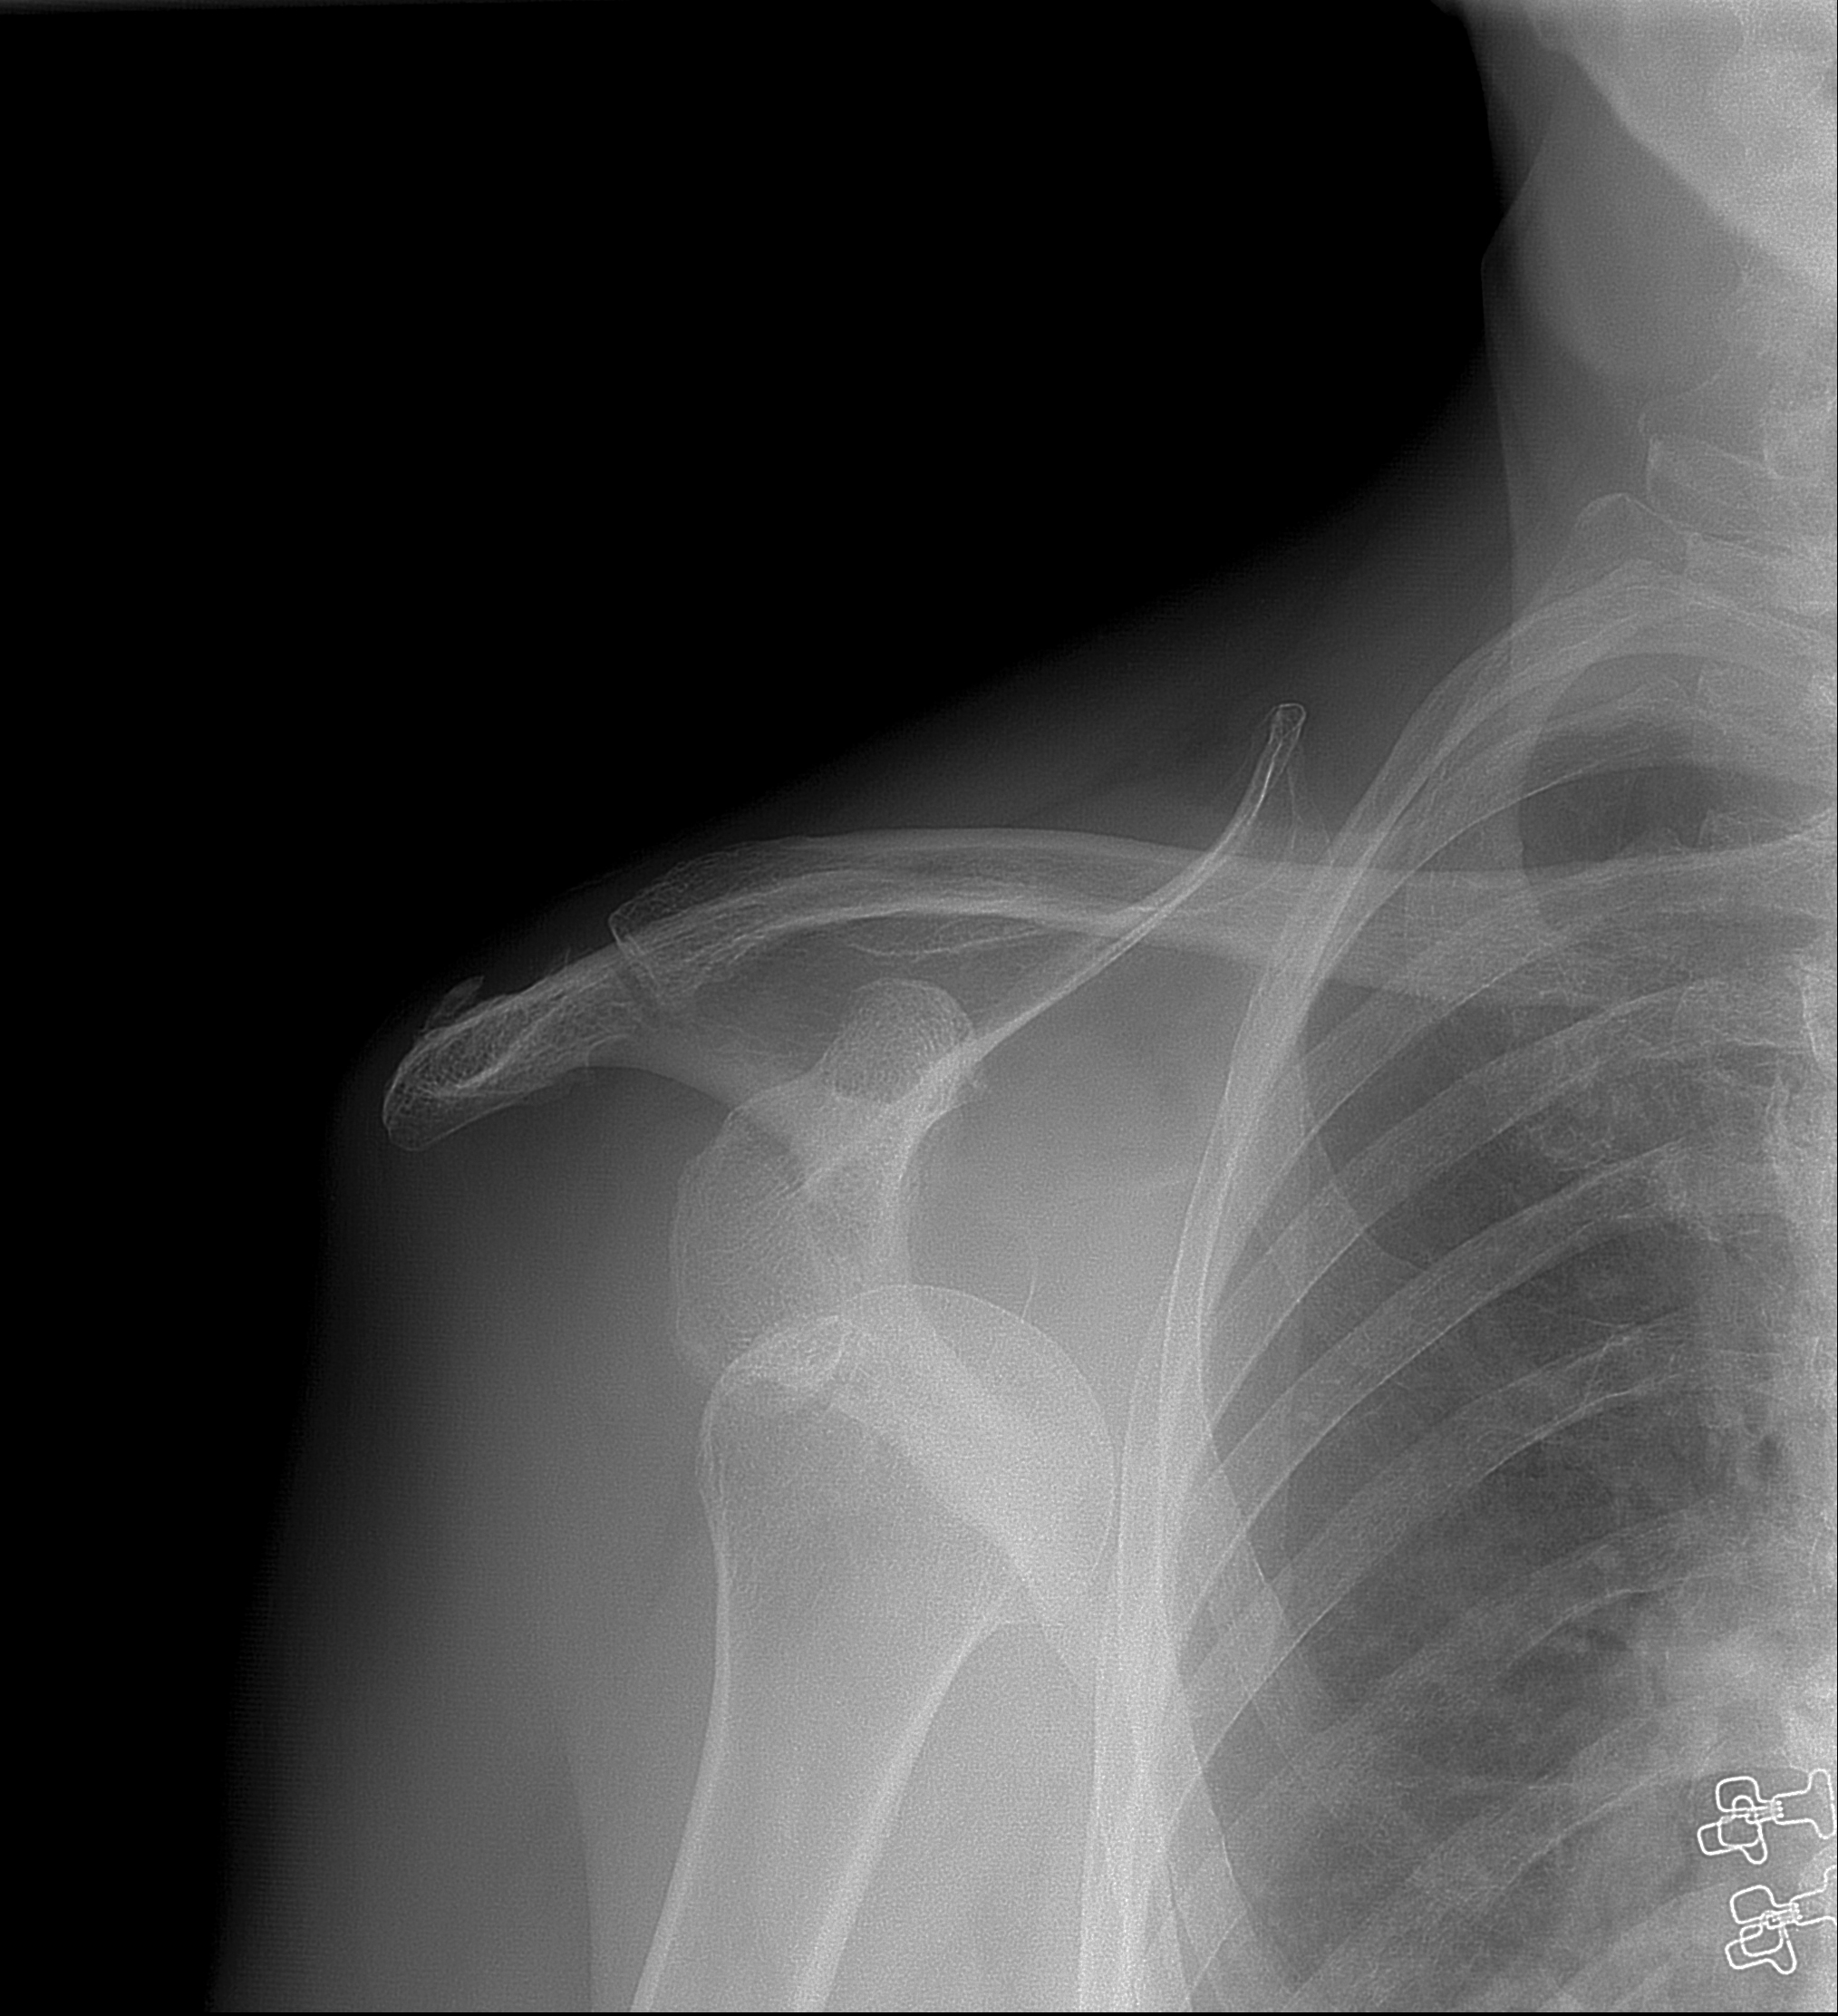 Dislocations of the shoulder and elbow